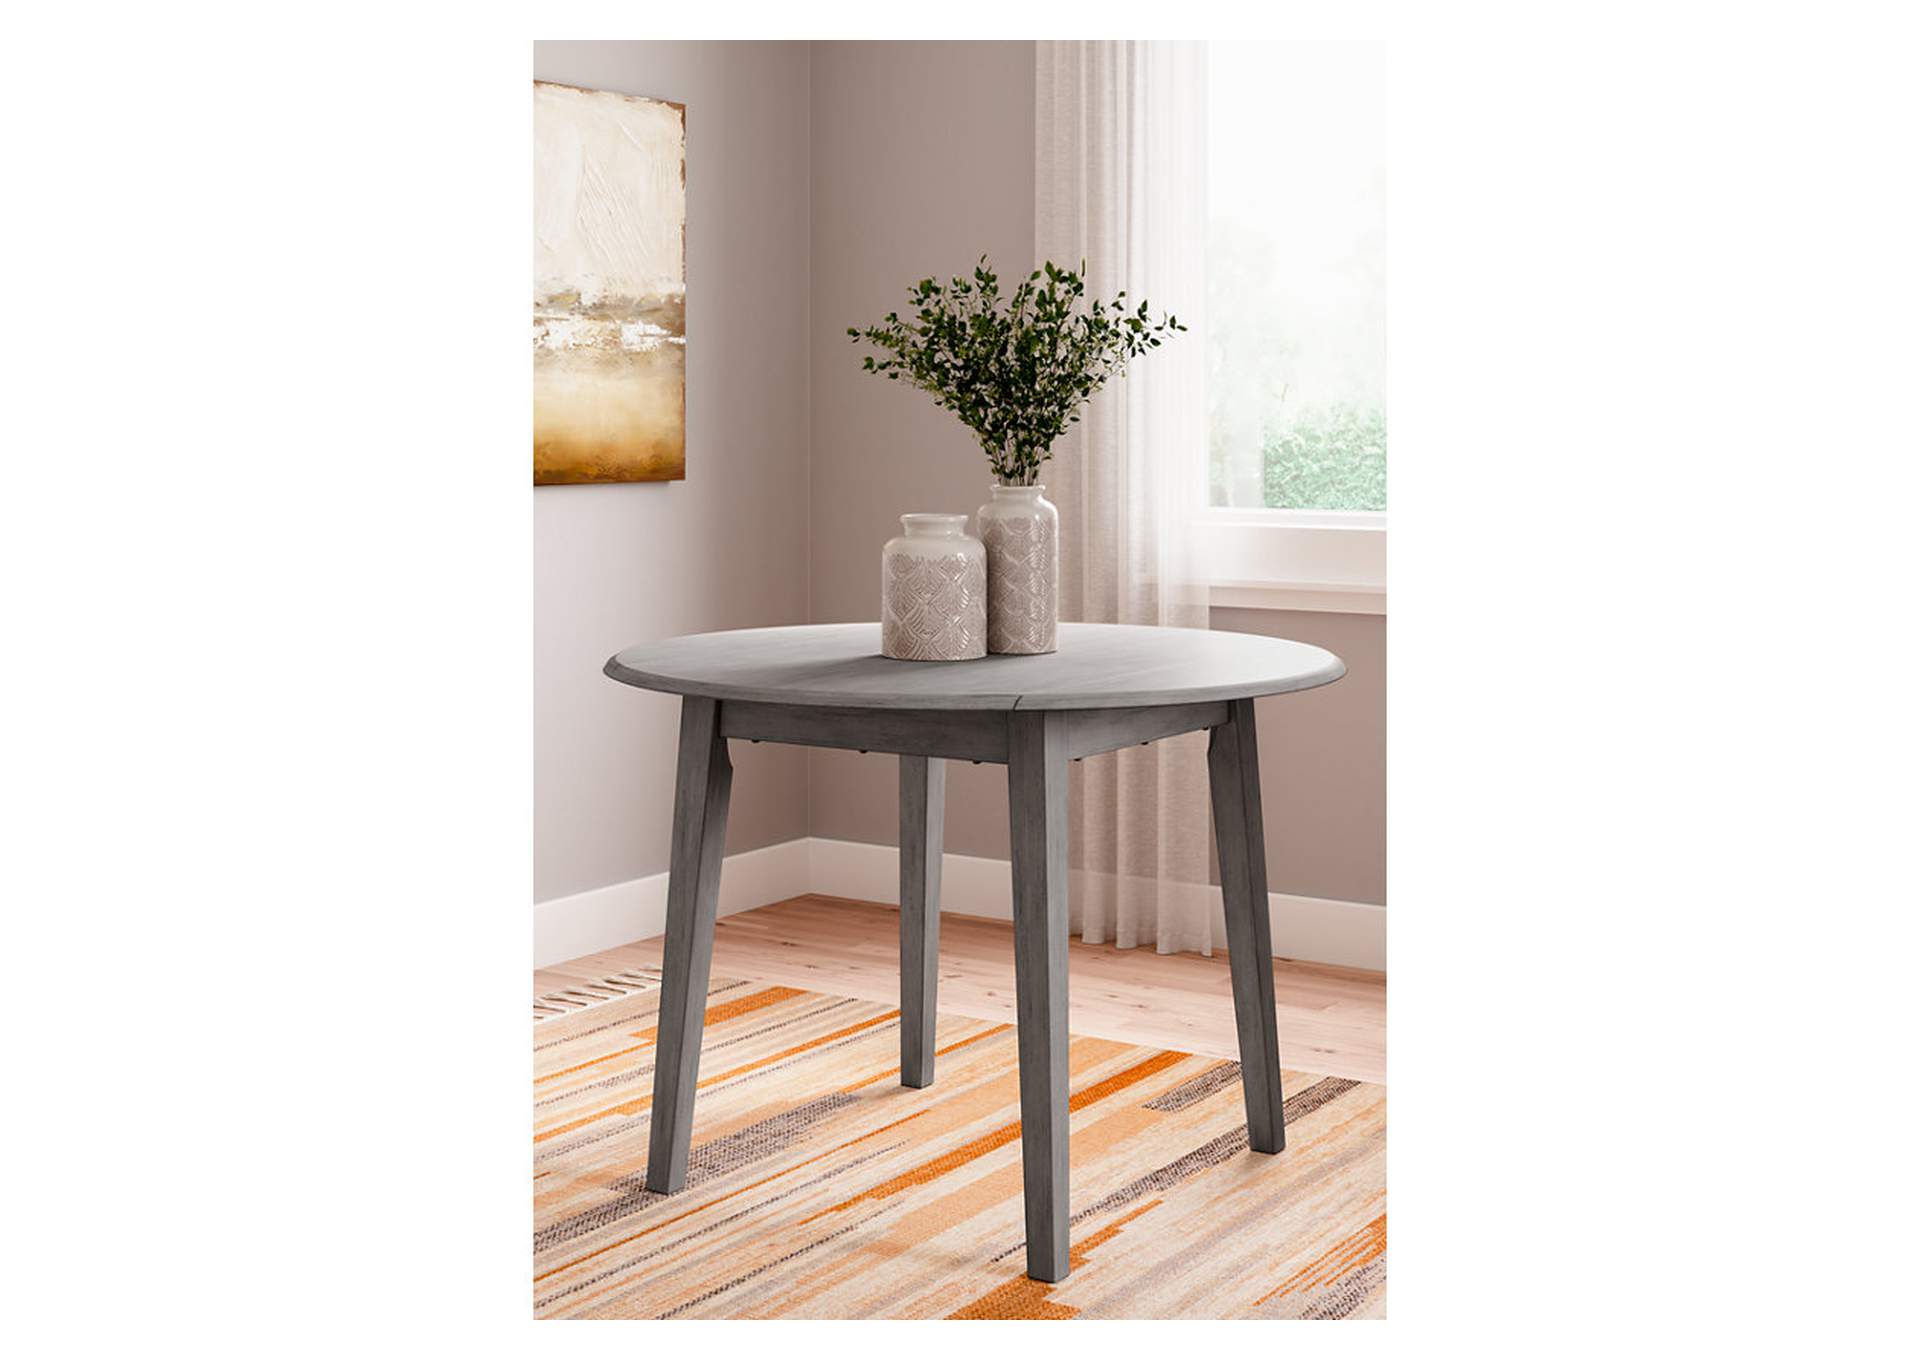 Shullden Drop Leaf Dining Table,Signature Design By Ashley